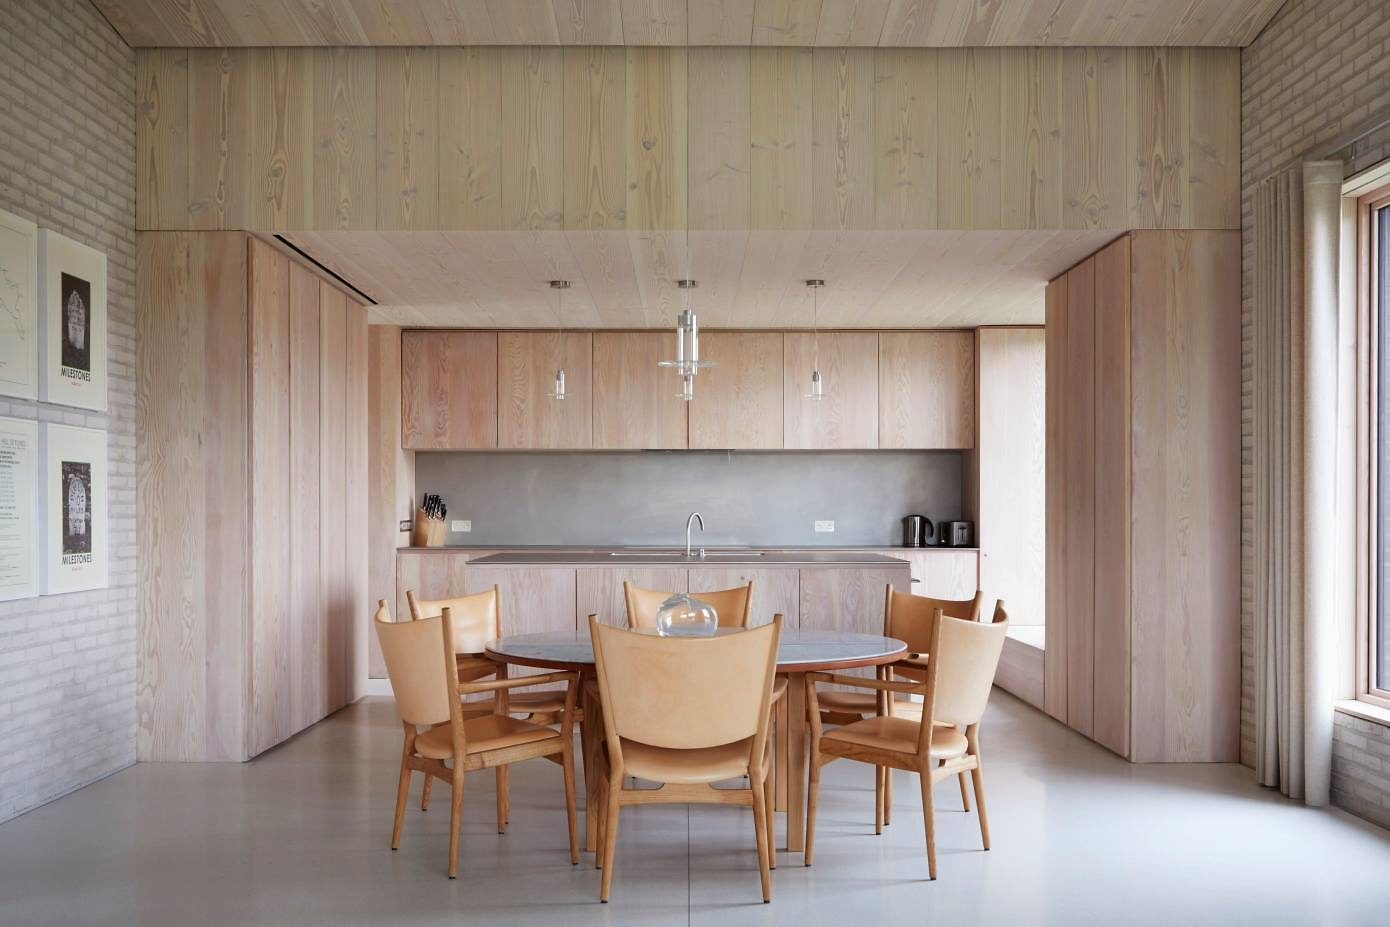 The Life House by John Pawson